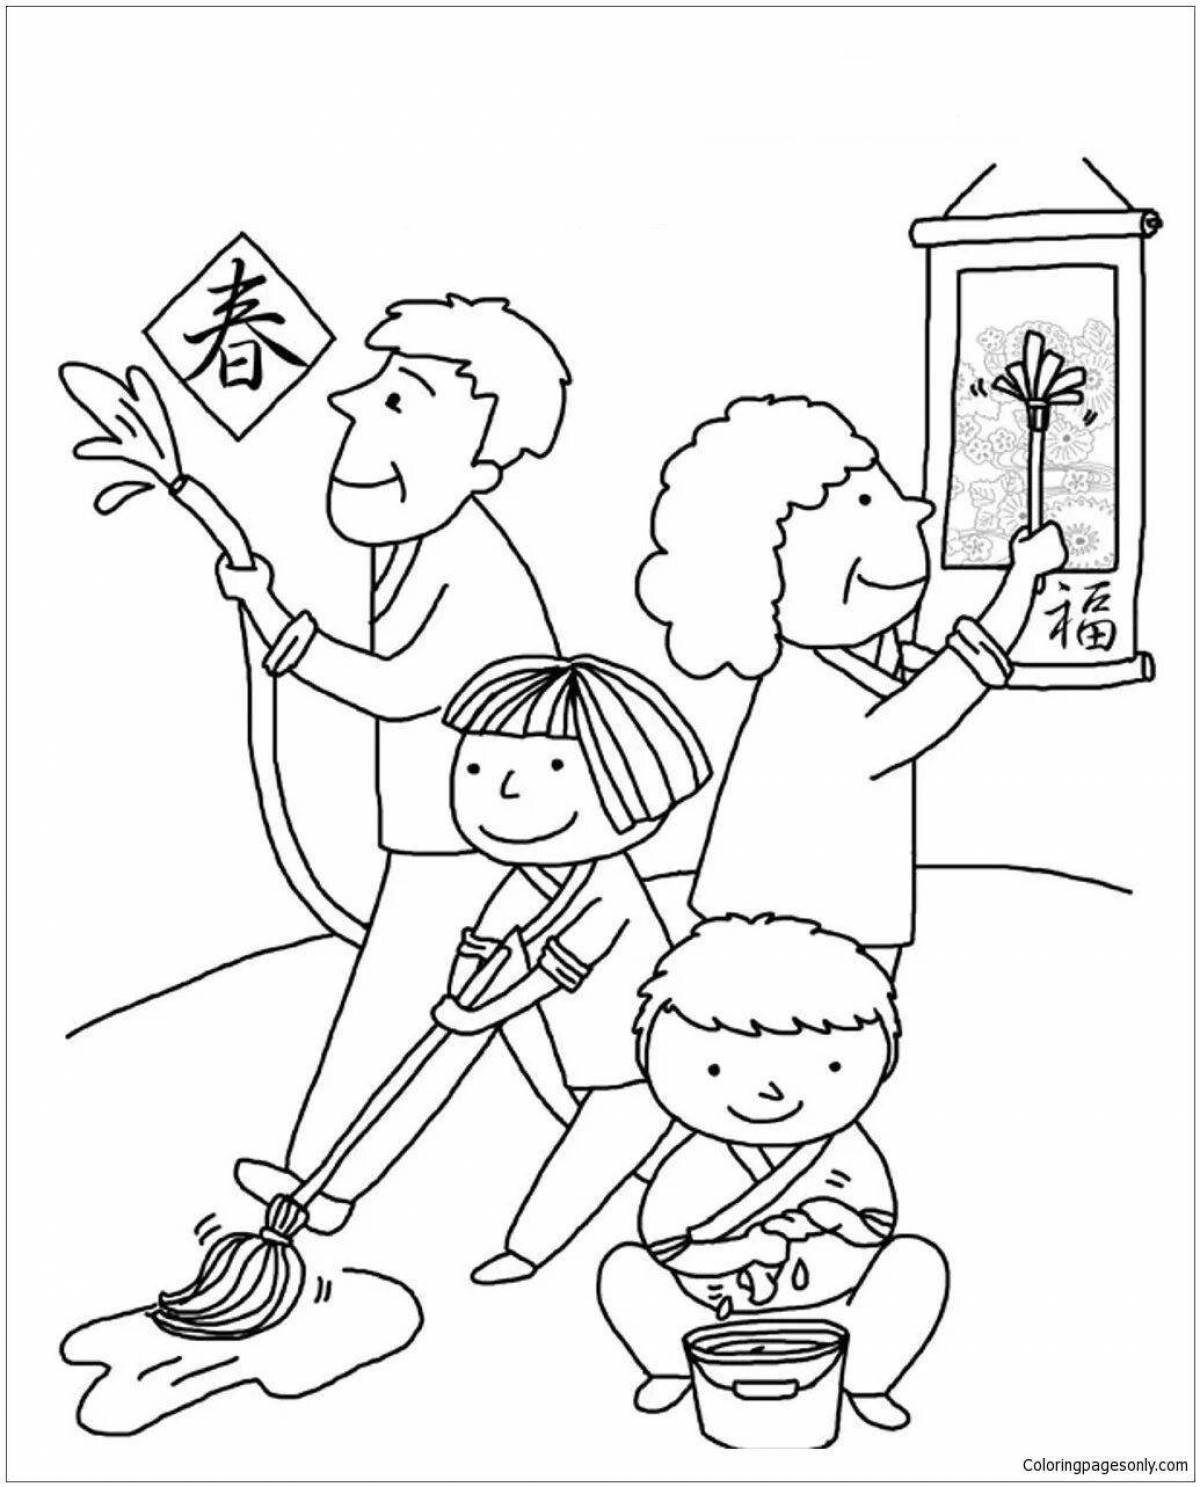 Innovative cleaning coloring page